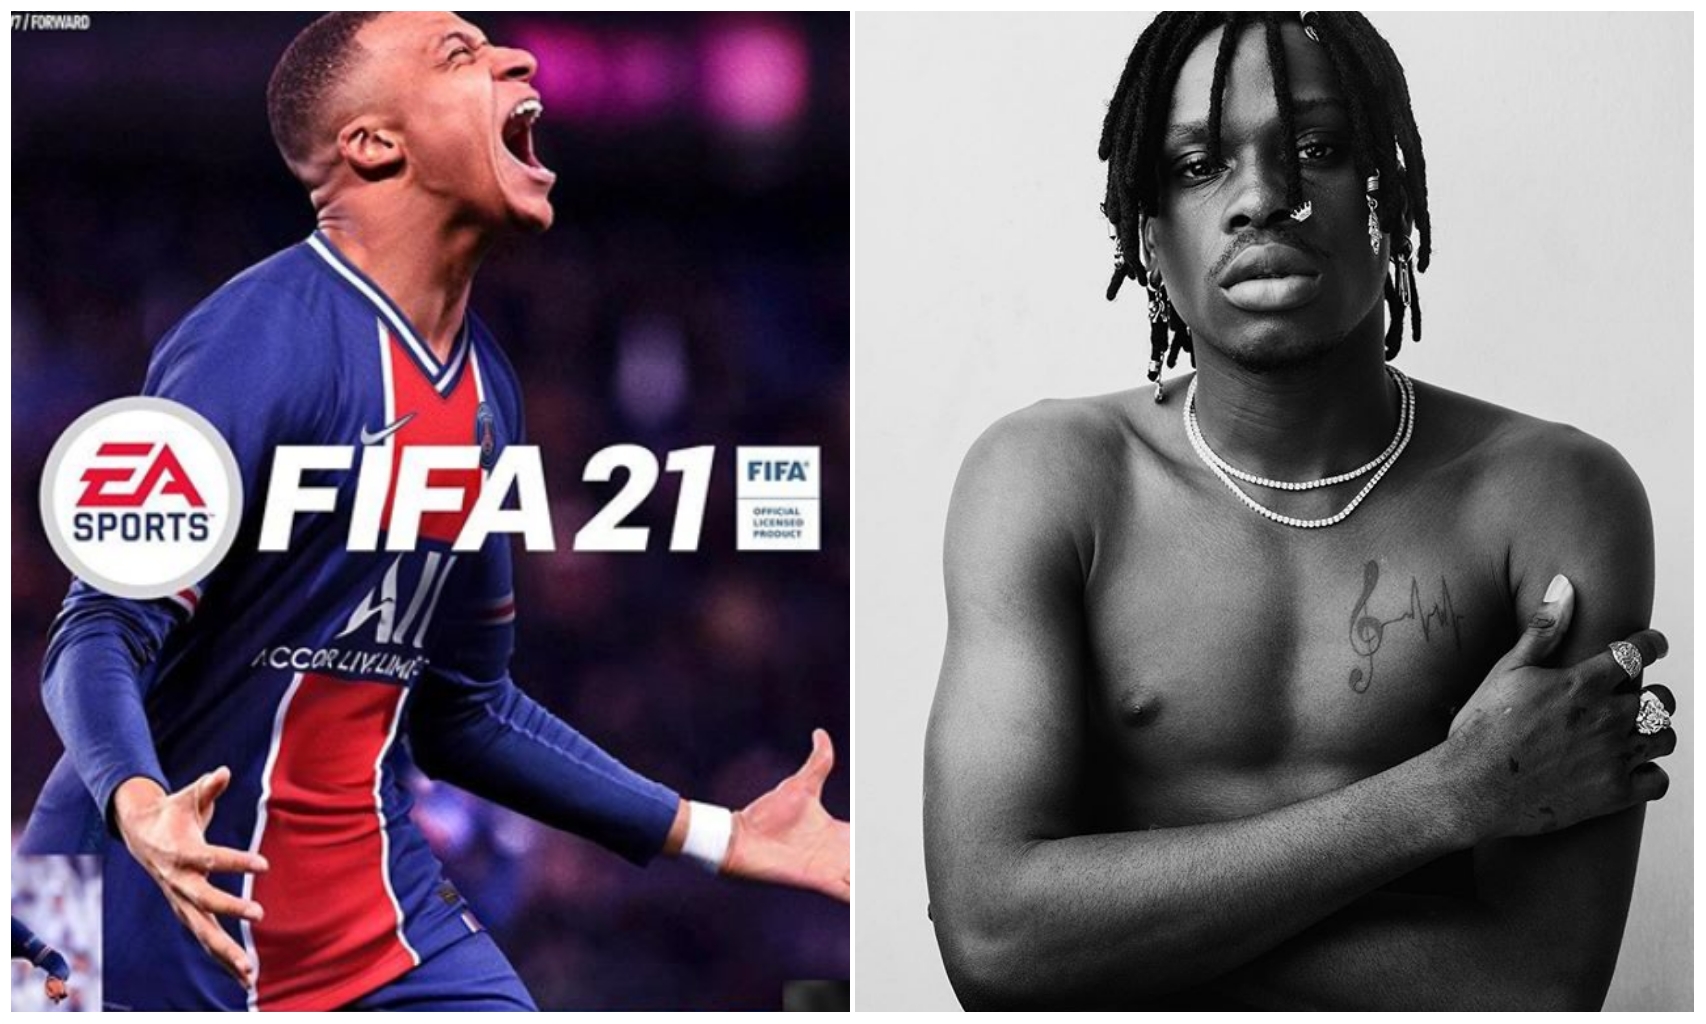 International Star: Fireboy’s 'Scatter' used as soundtracks for FIFA 21 Video game